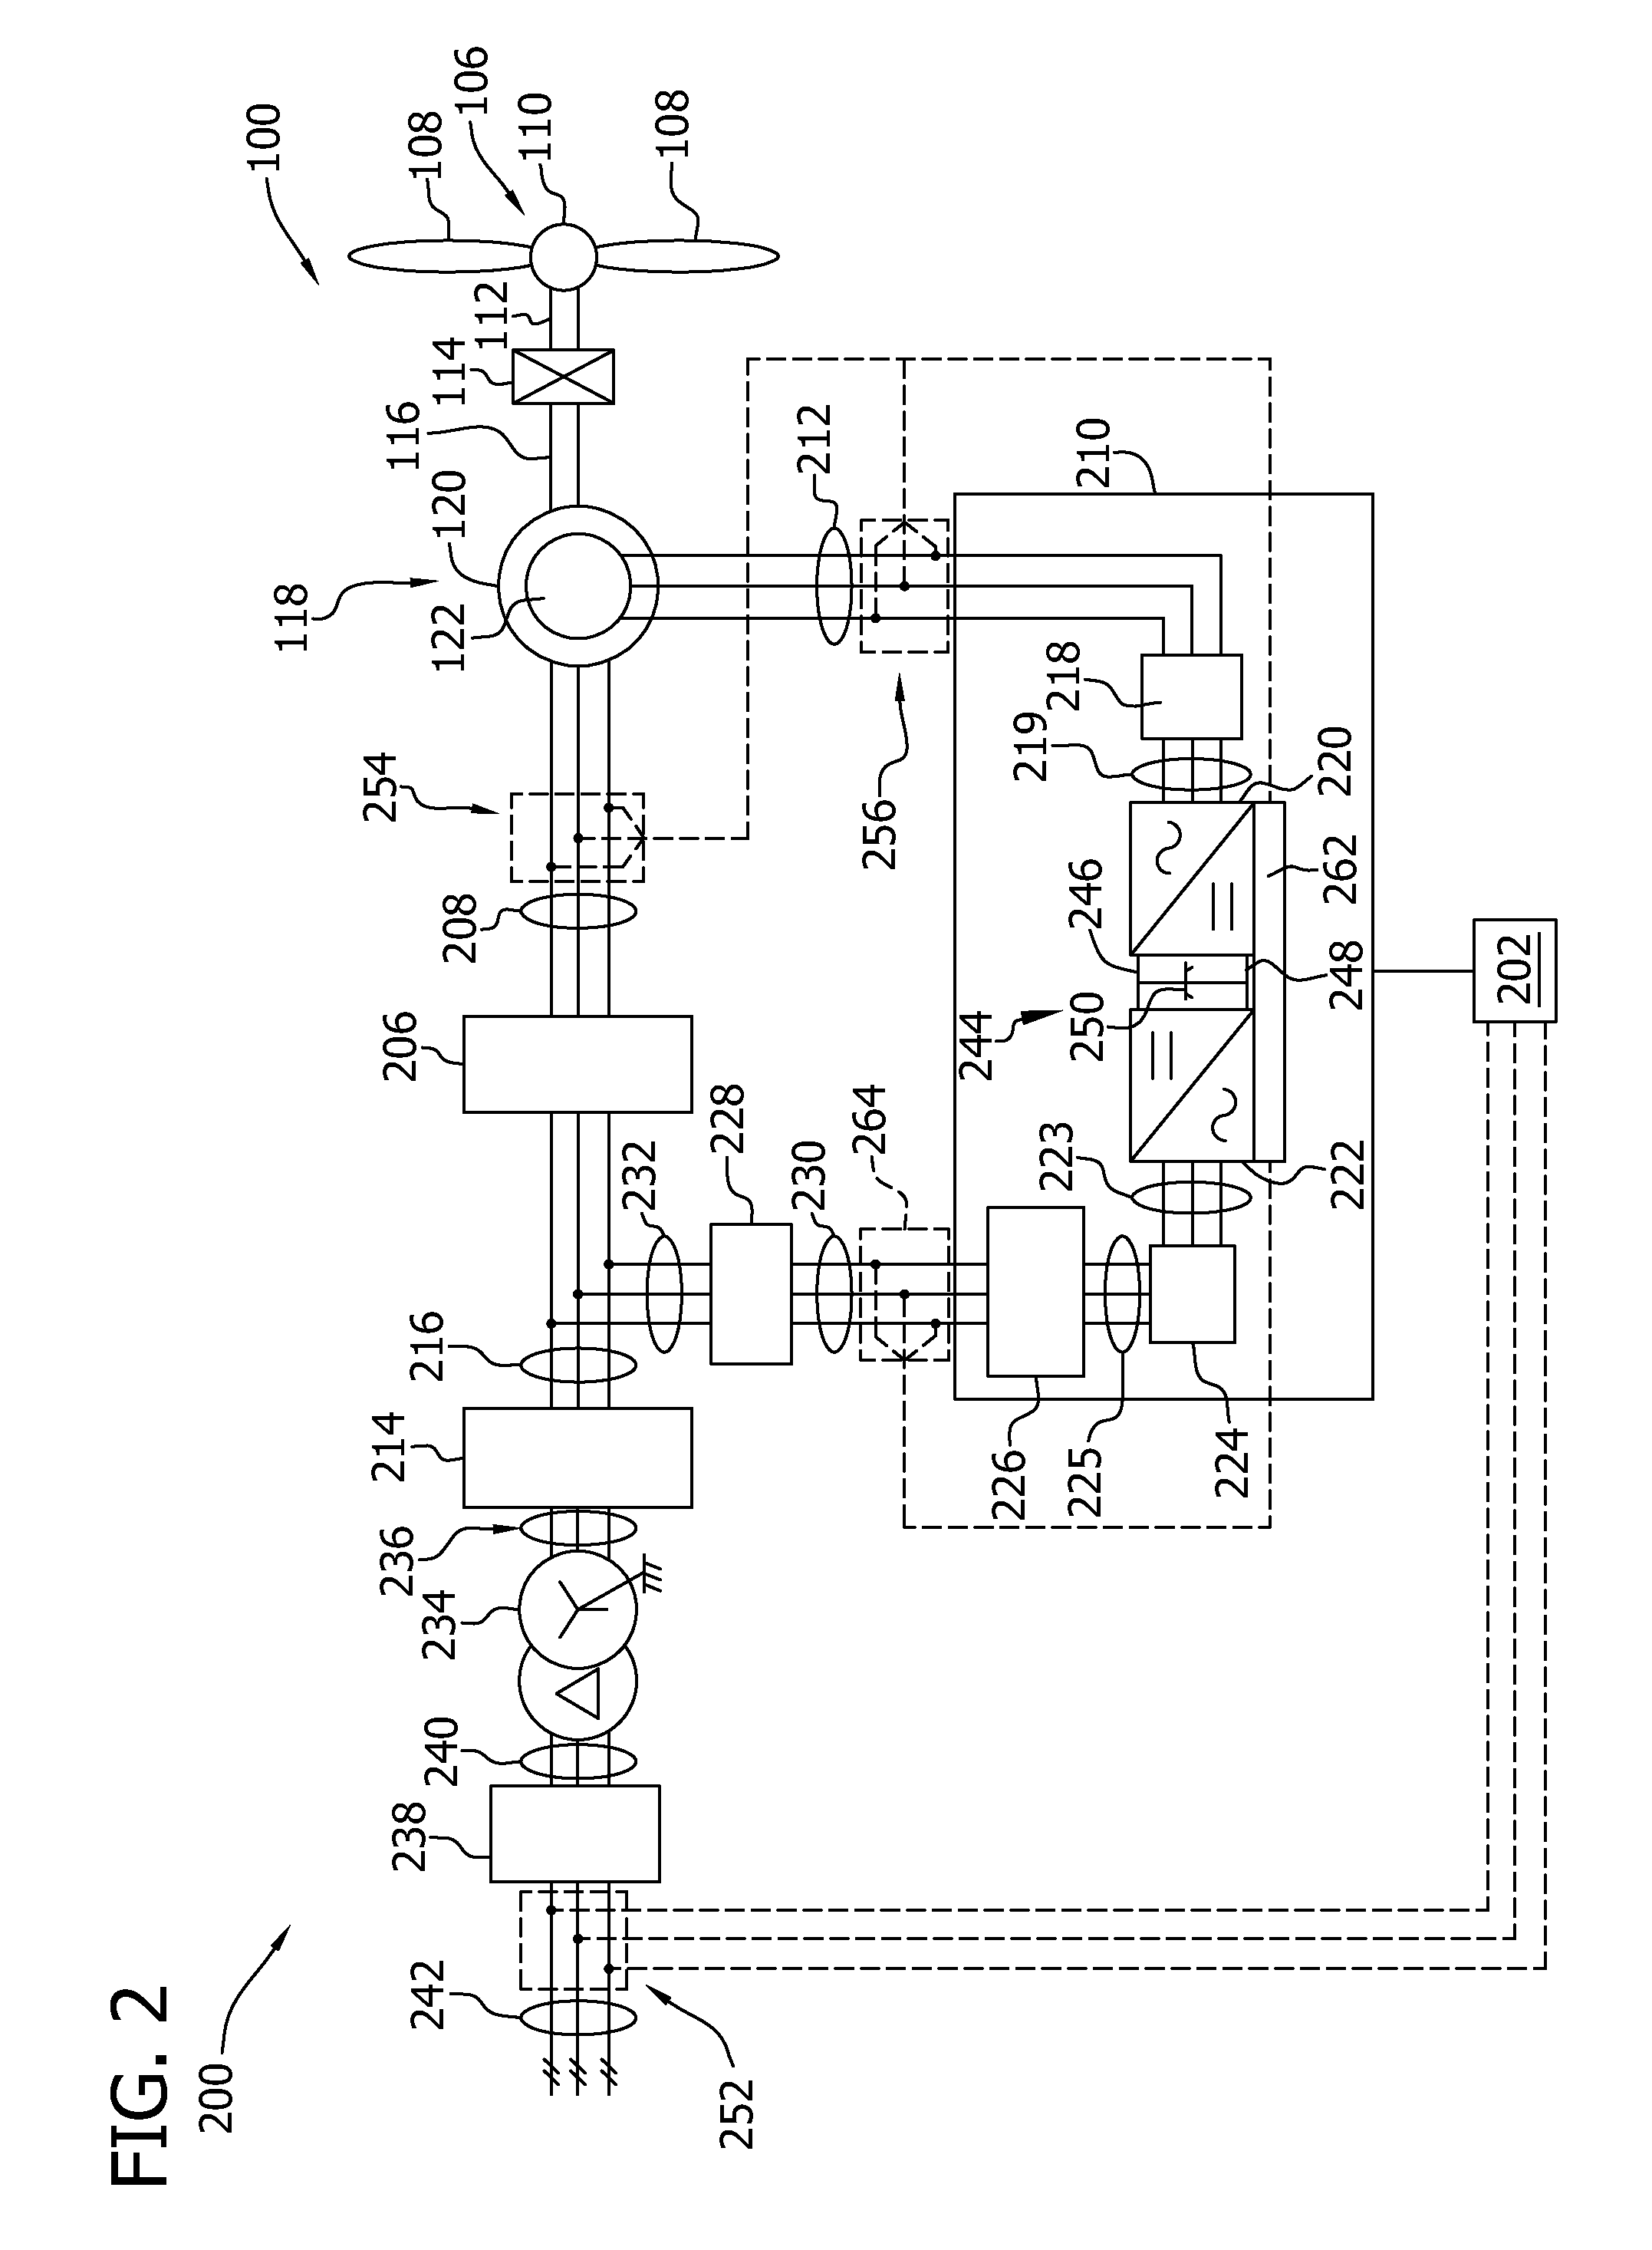 Overvoltage clipping device for a wind turbine and method